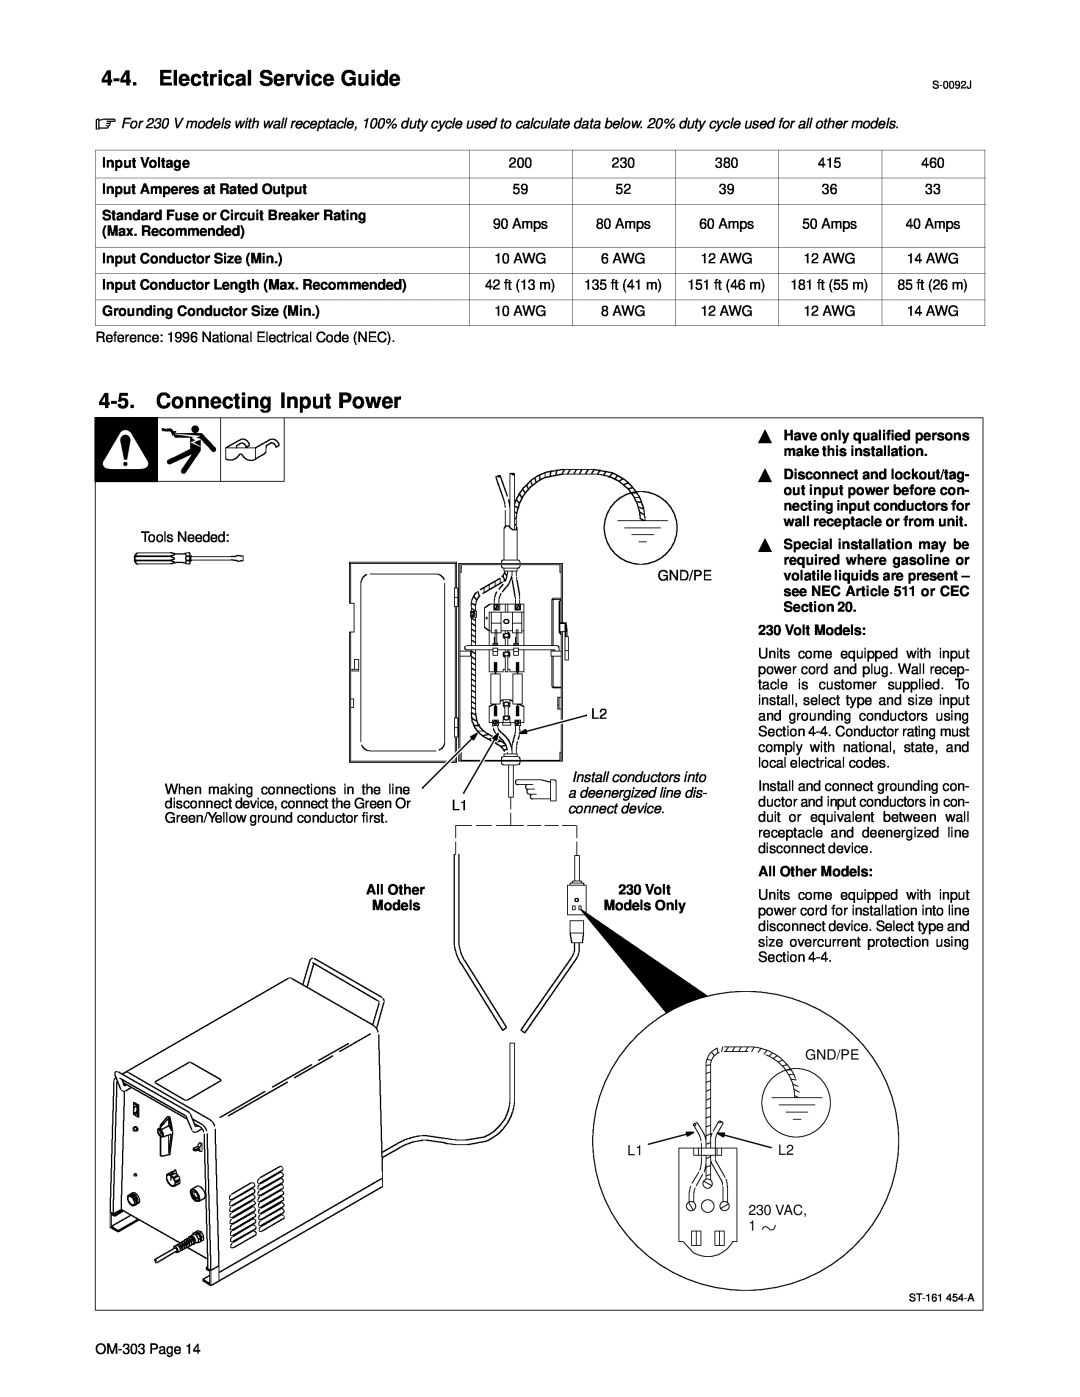 Hobart OM-303 manual Electrical Service Guide, Connecting Input Power 